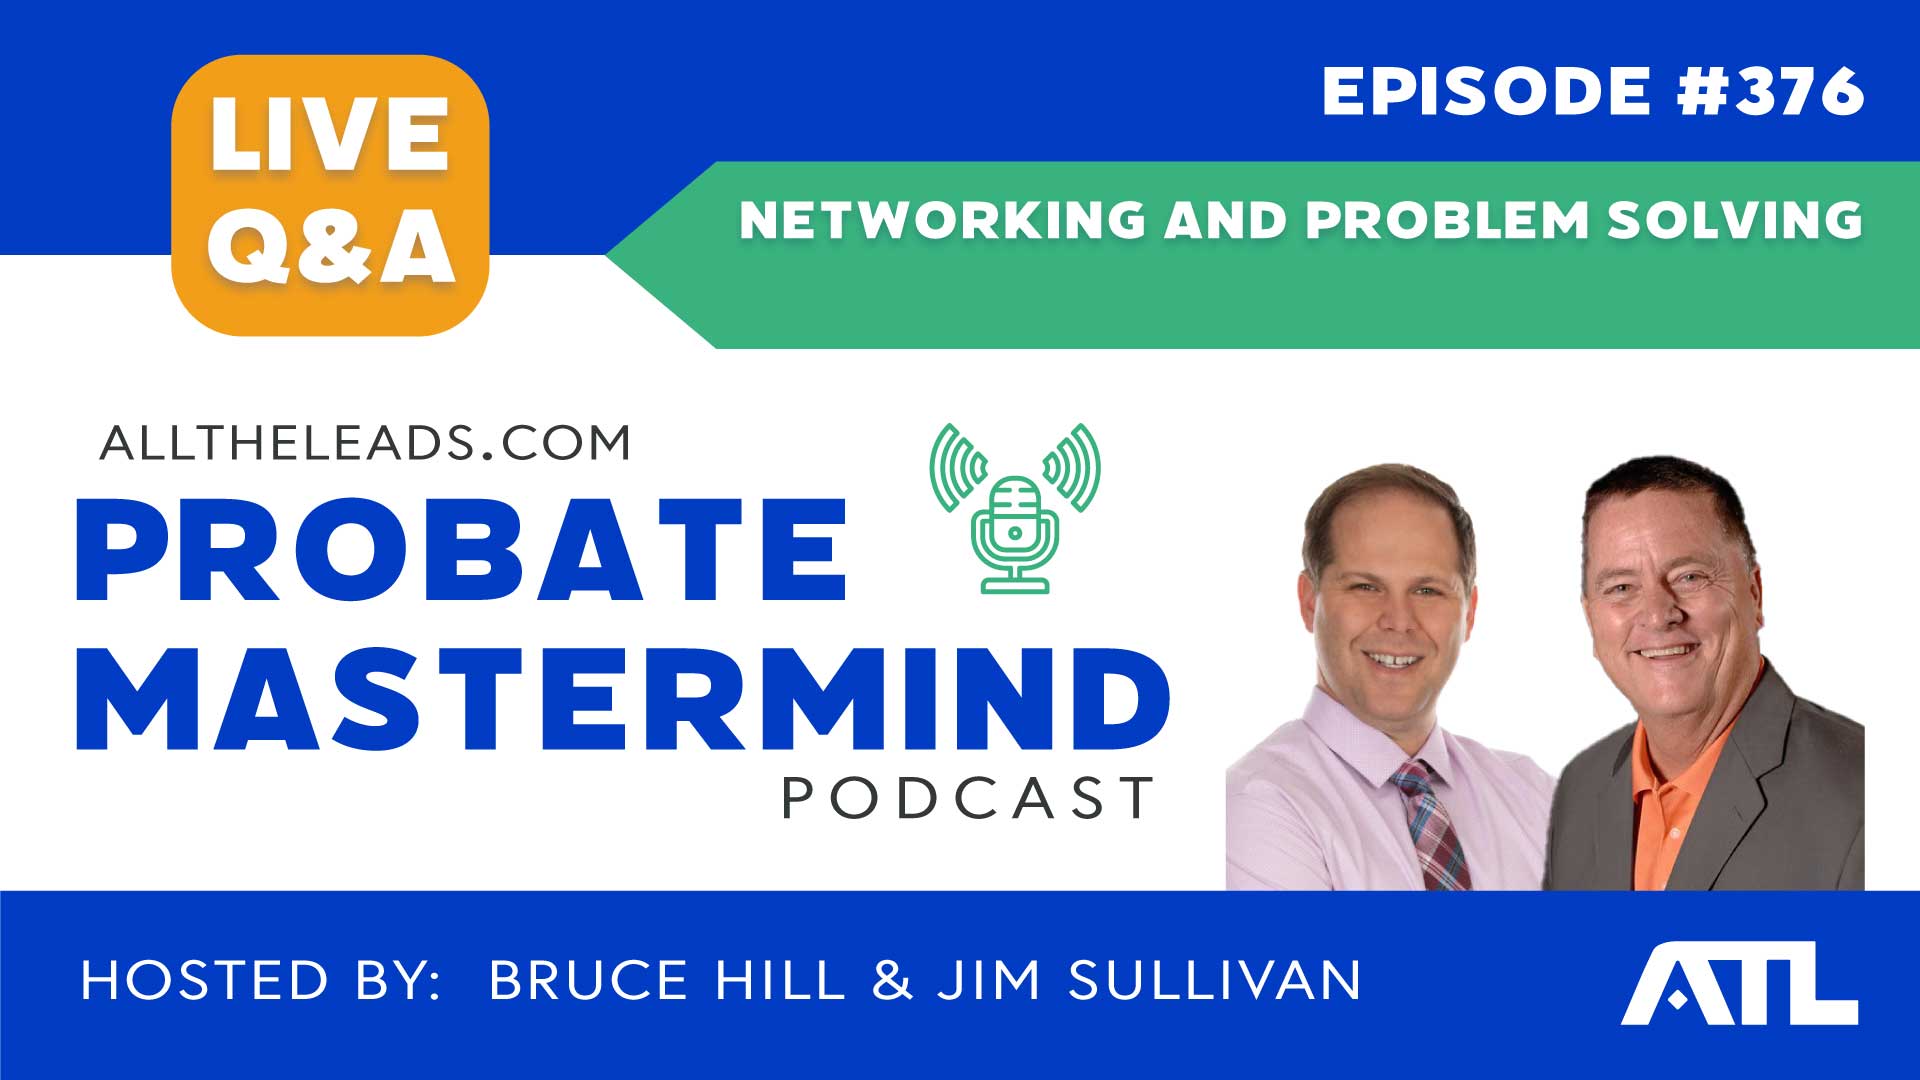 Networking and Problem Solving | Probate Mastermind Episode #376